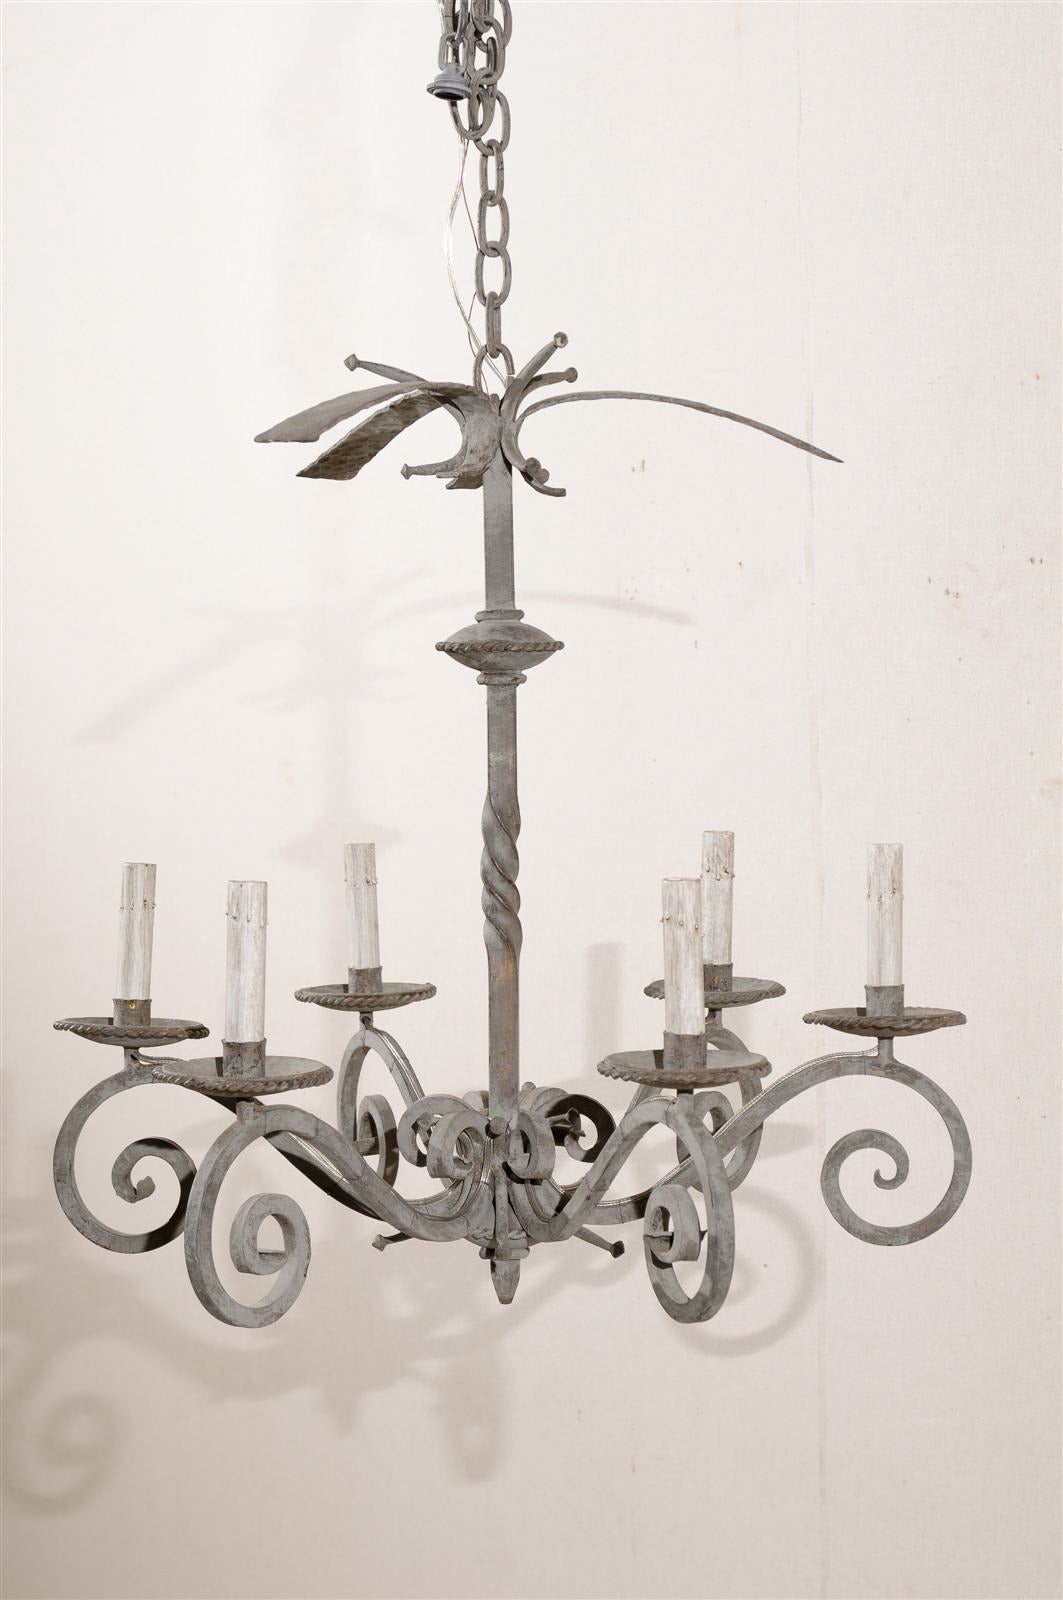 French Vintage Six-Light Light Grey Painted Iron Chandelier with Scrolled Arms For Sale 4